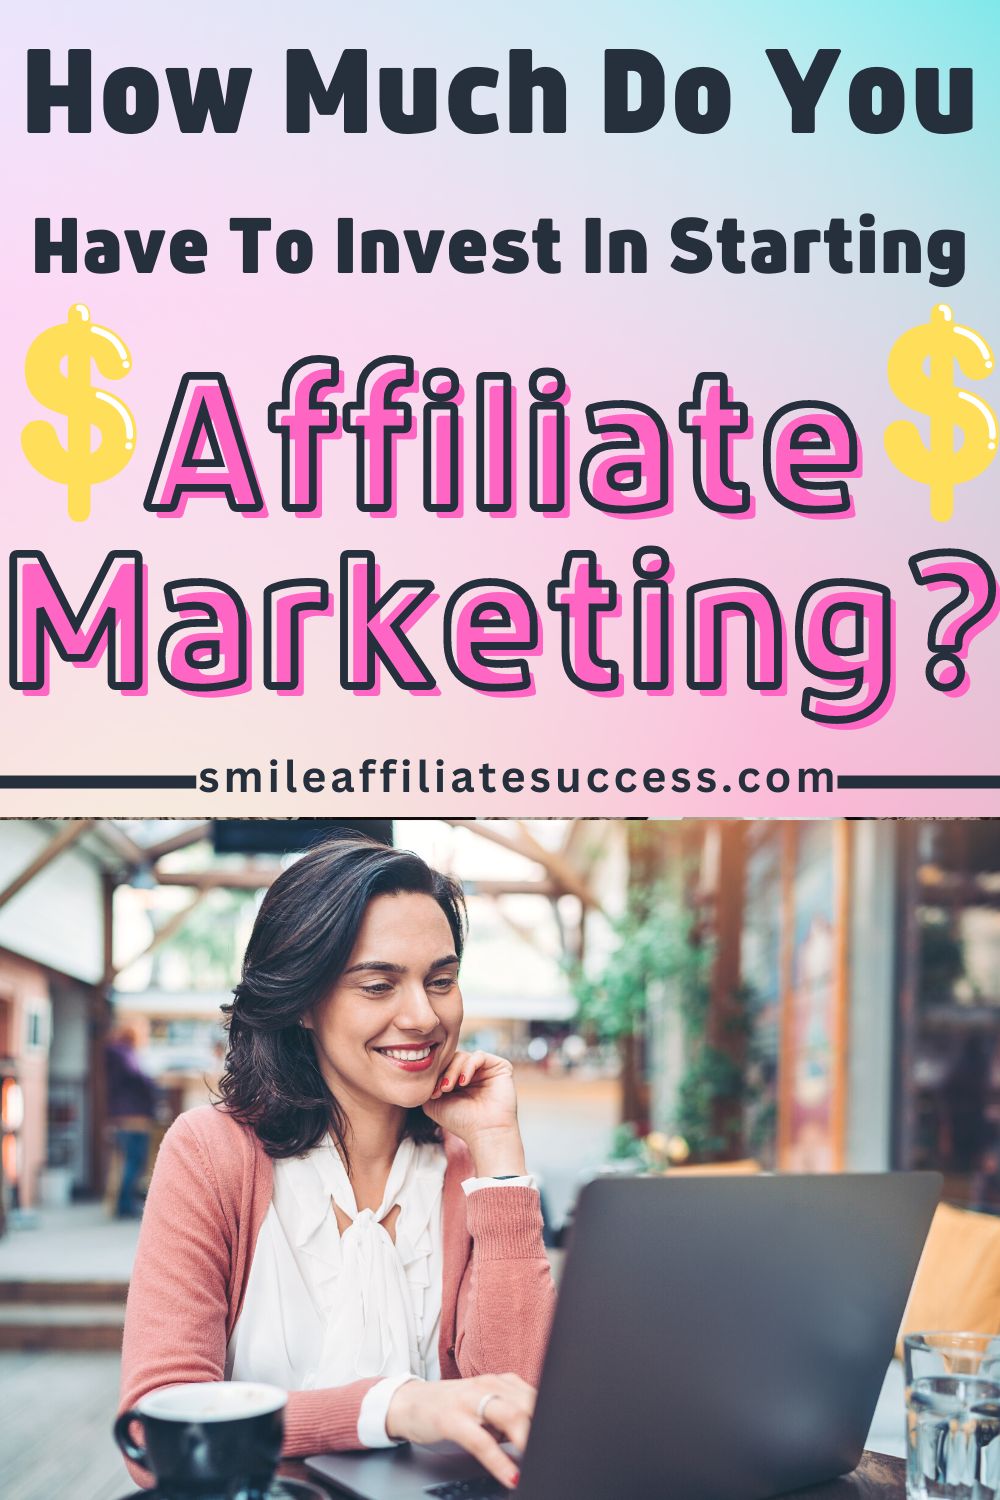 How Much Do You Have To Invest In Starting Affiliate Marketing?